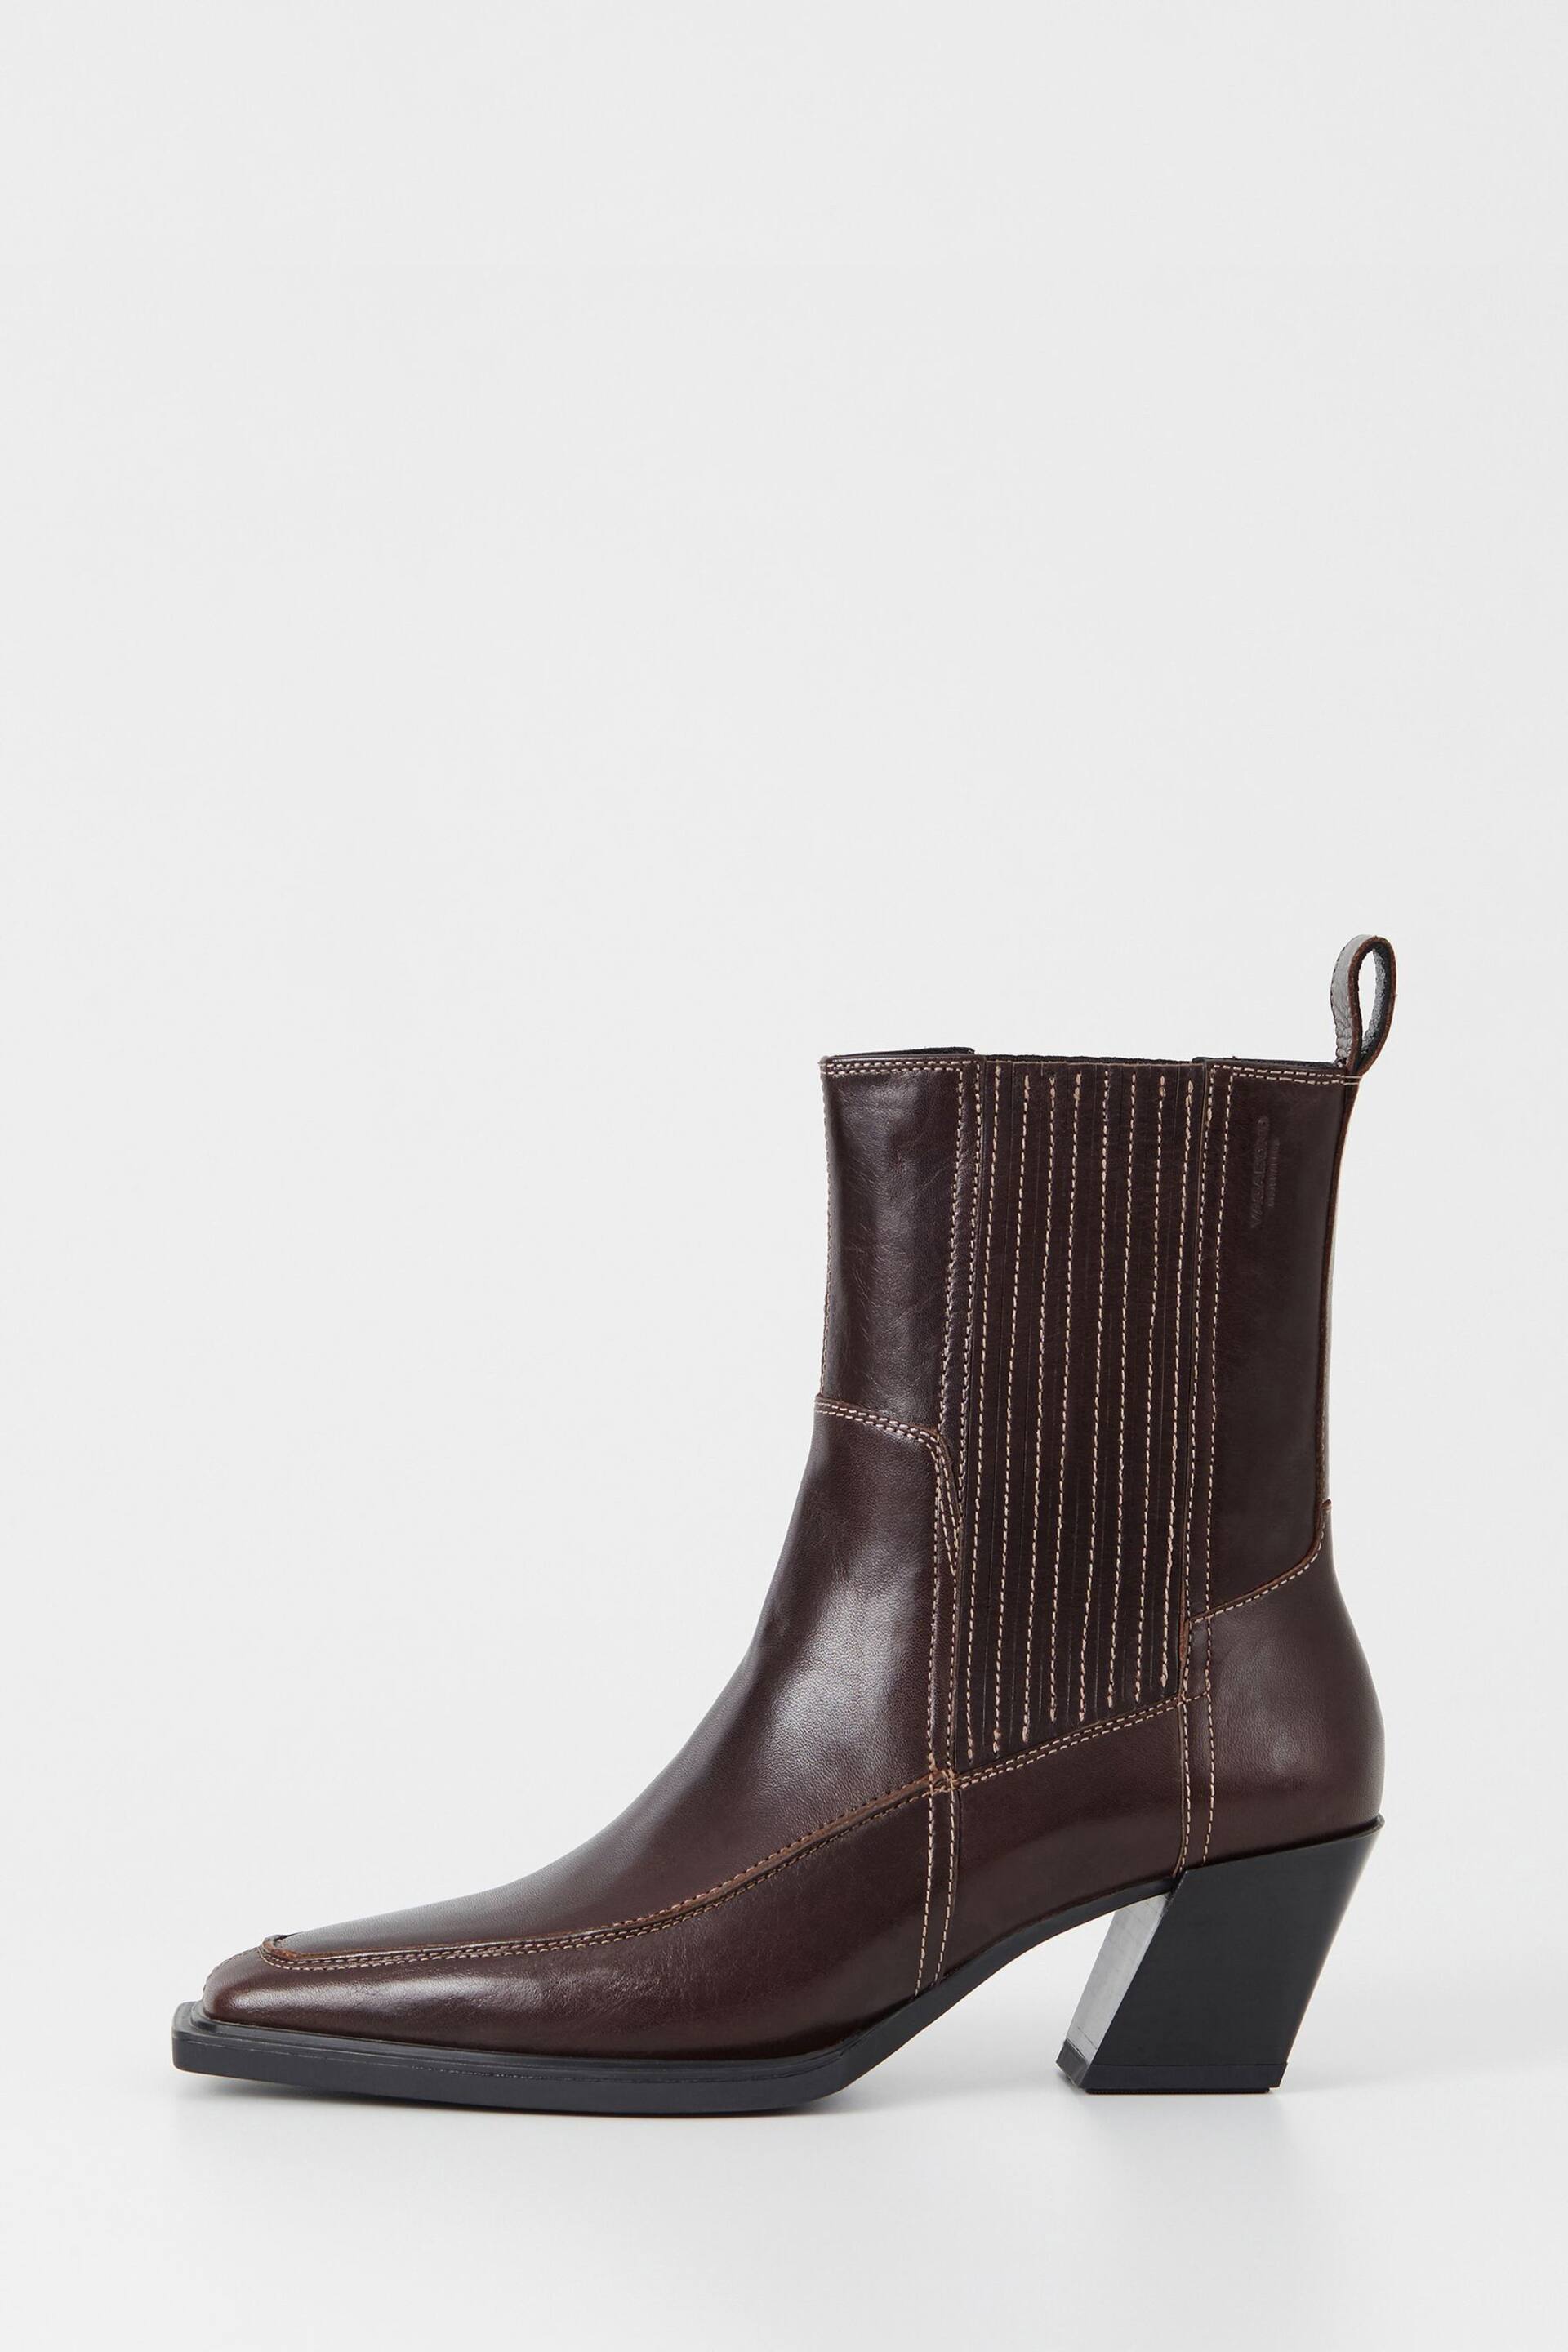 Vagabond Shoemakers Alina Stitch Western Brown Boots - Image 1 of 3